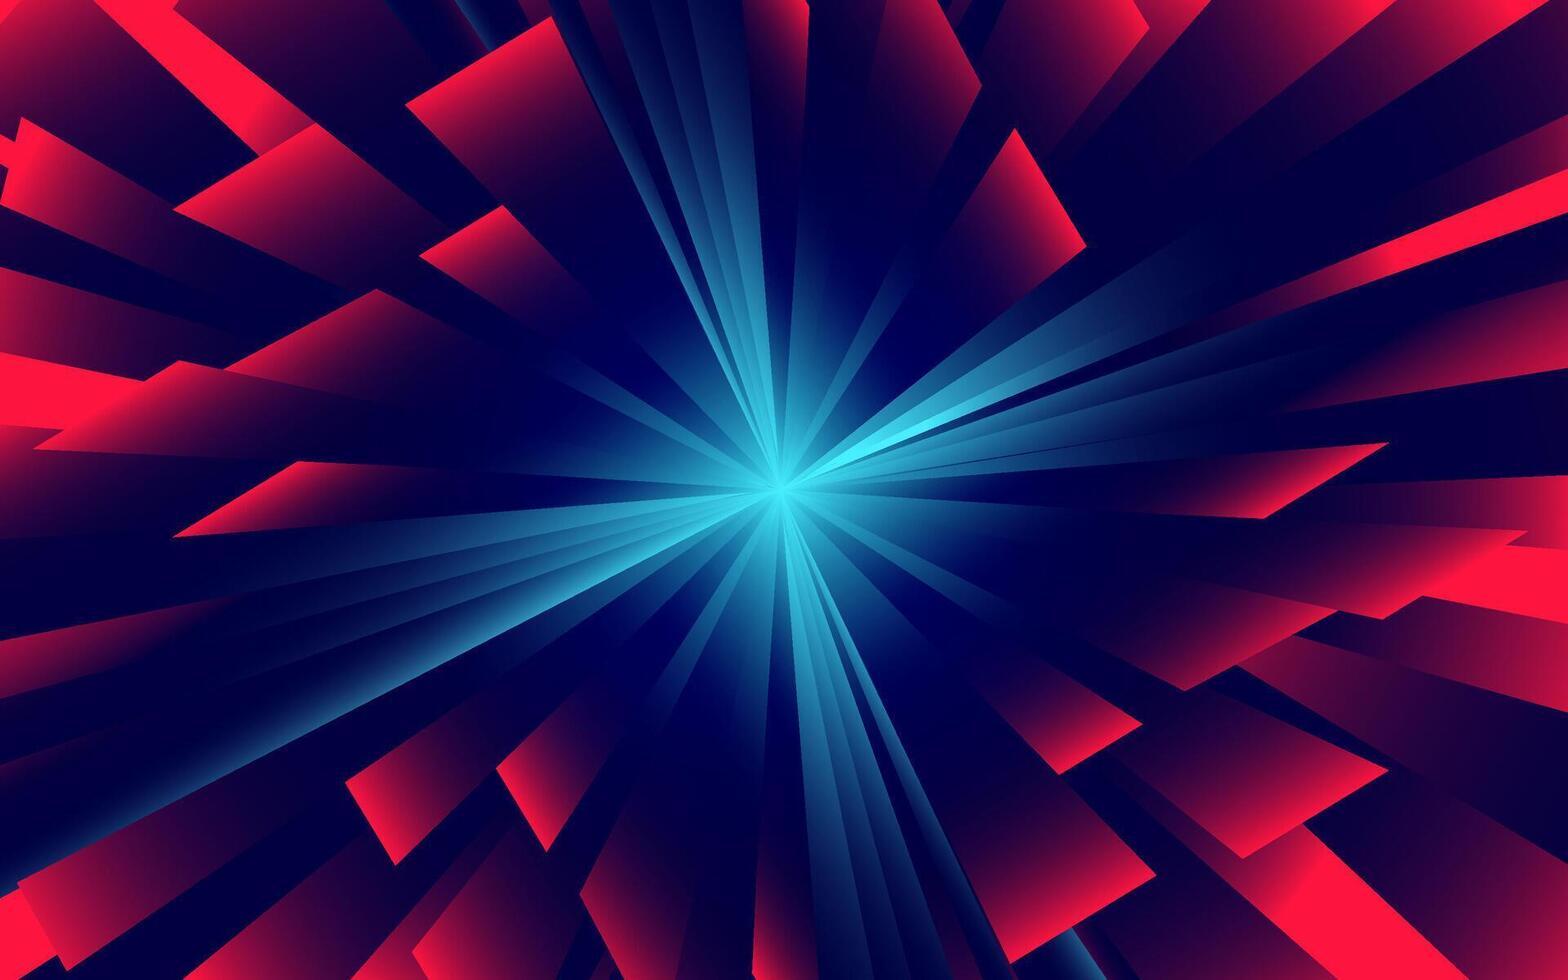 abstract red and blue background with a starburst light effect vector